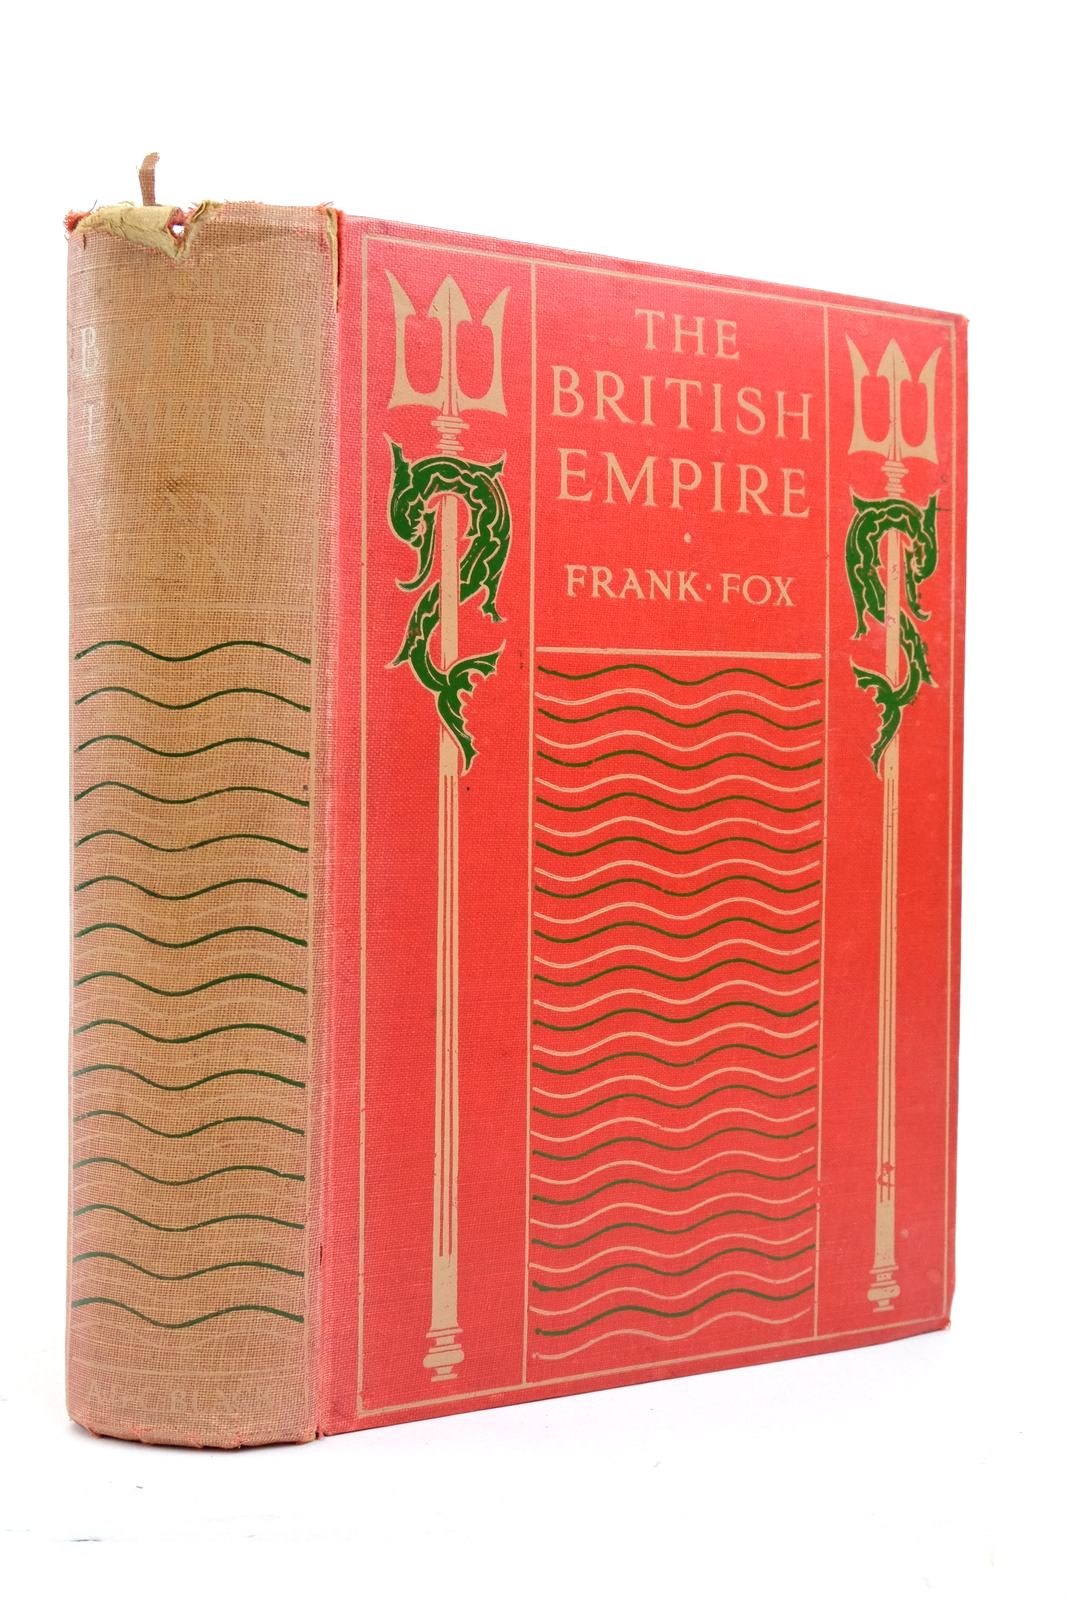 Photo of THE BRITISH EMPIRE- Stock Number: 2137556